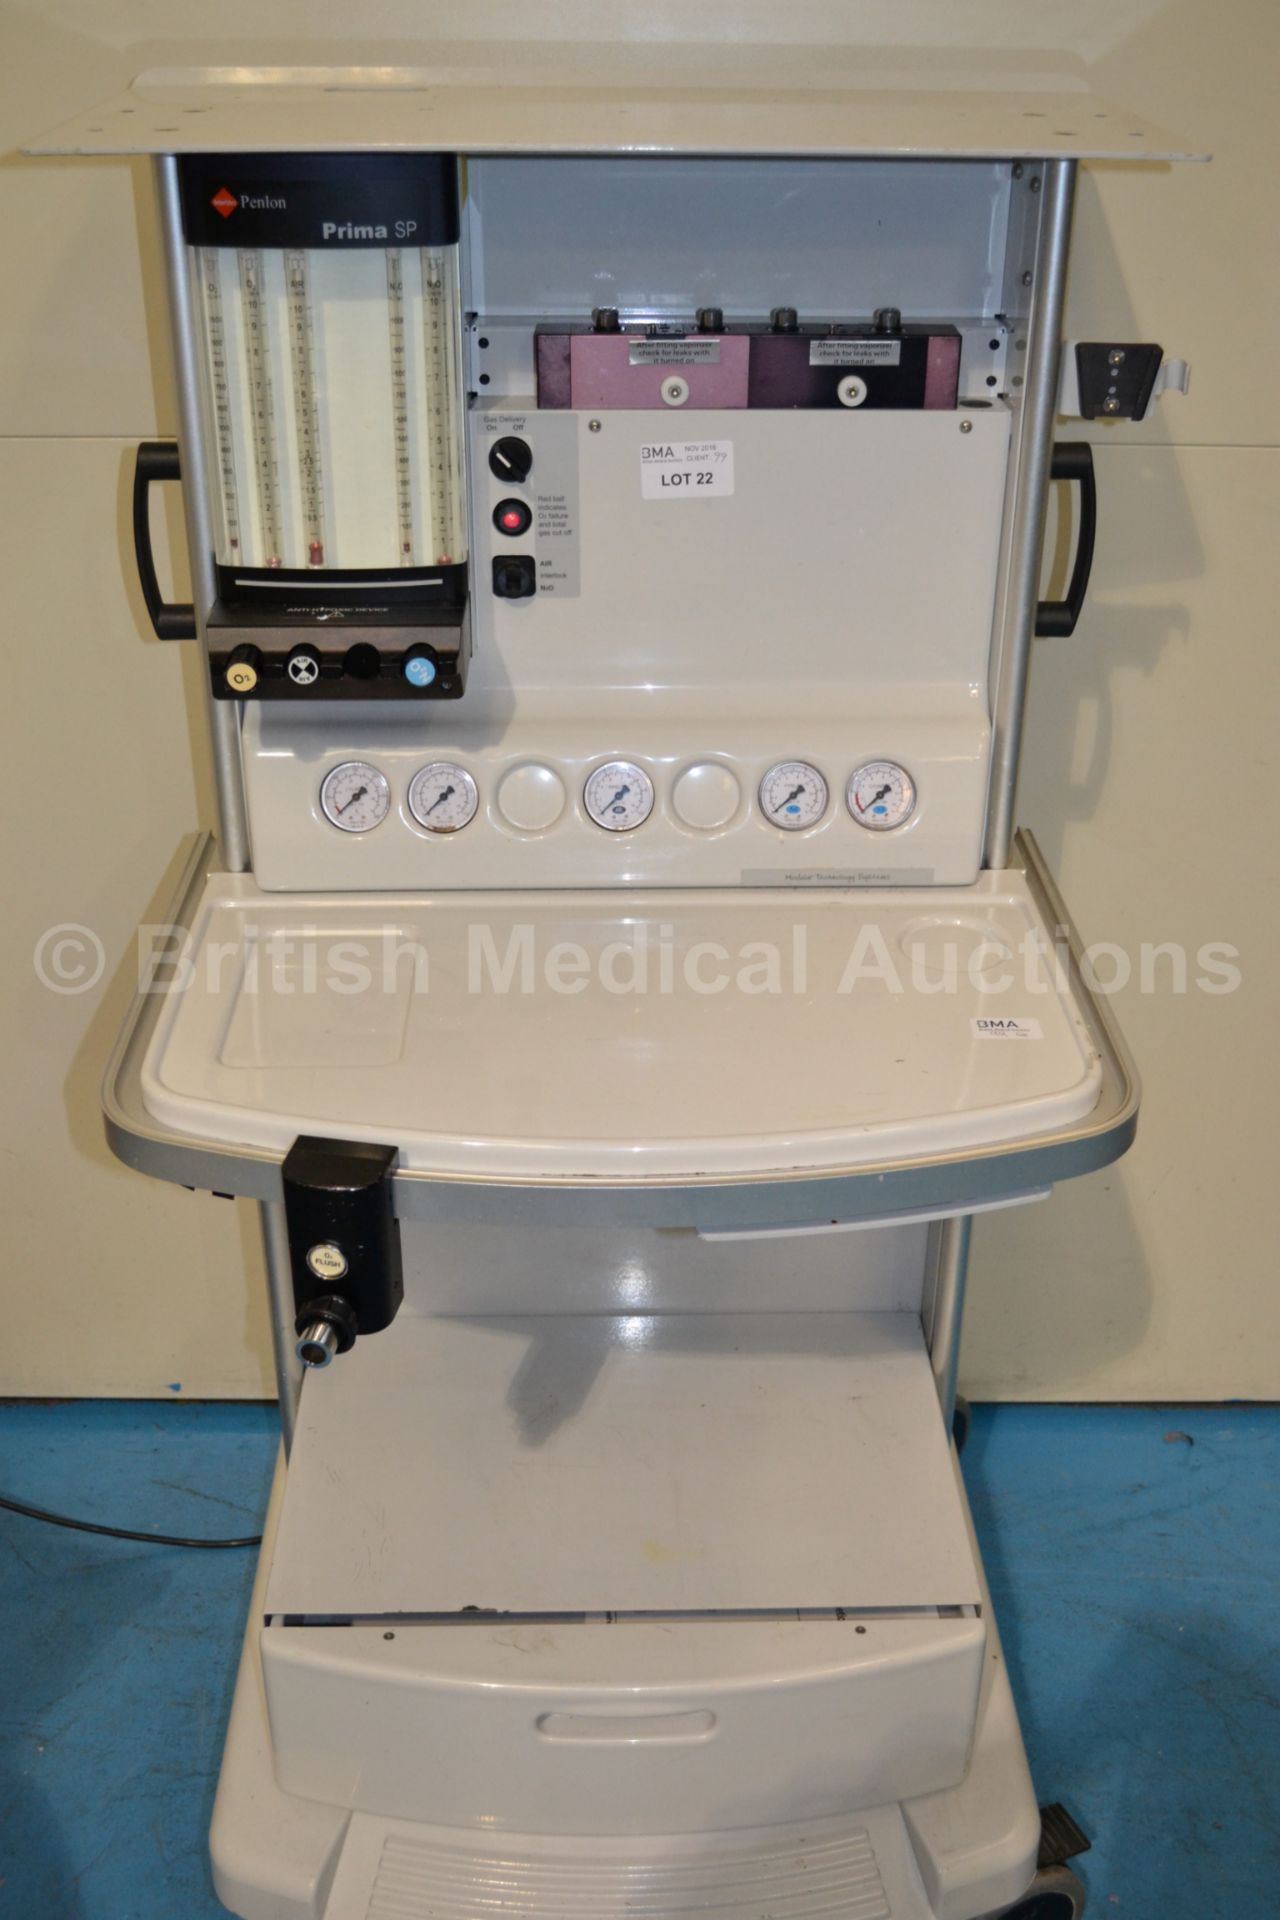 Penlon Prima SP Anaesthesia System with Hoses (GH) - Image 3 of 5